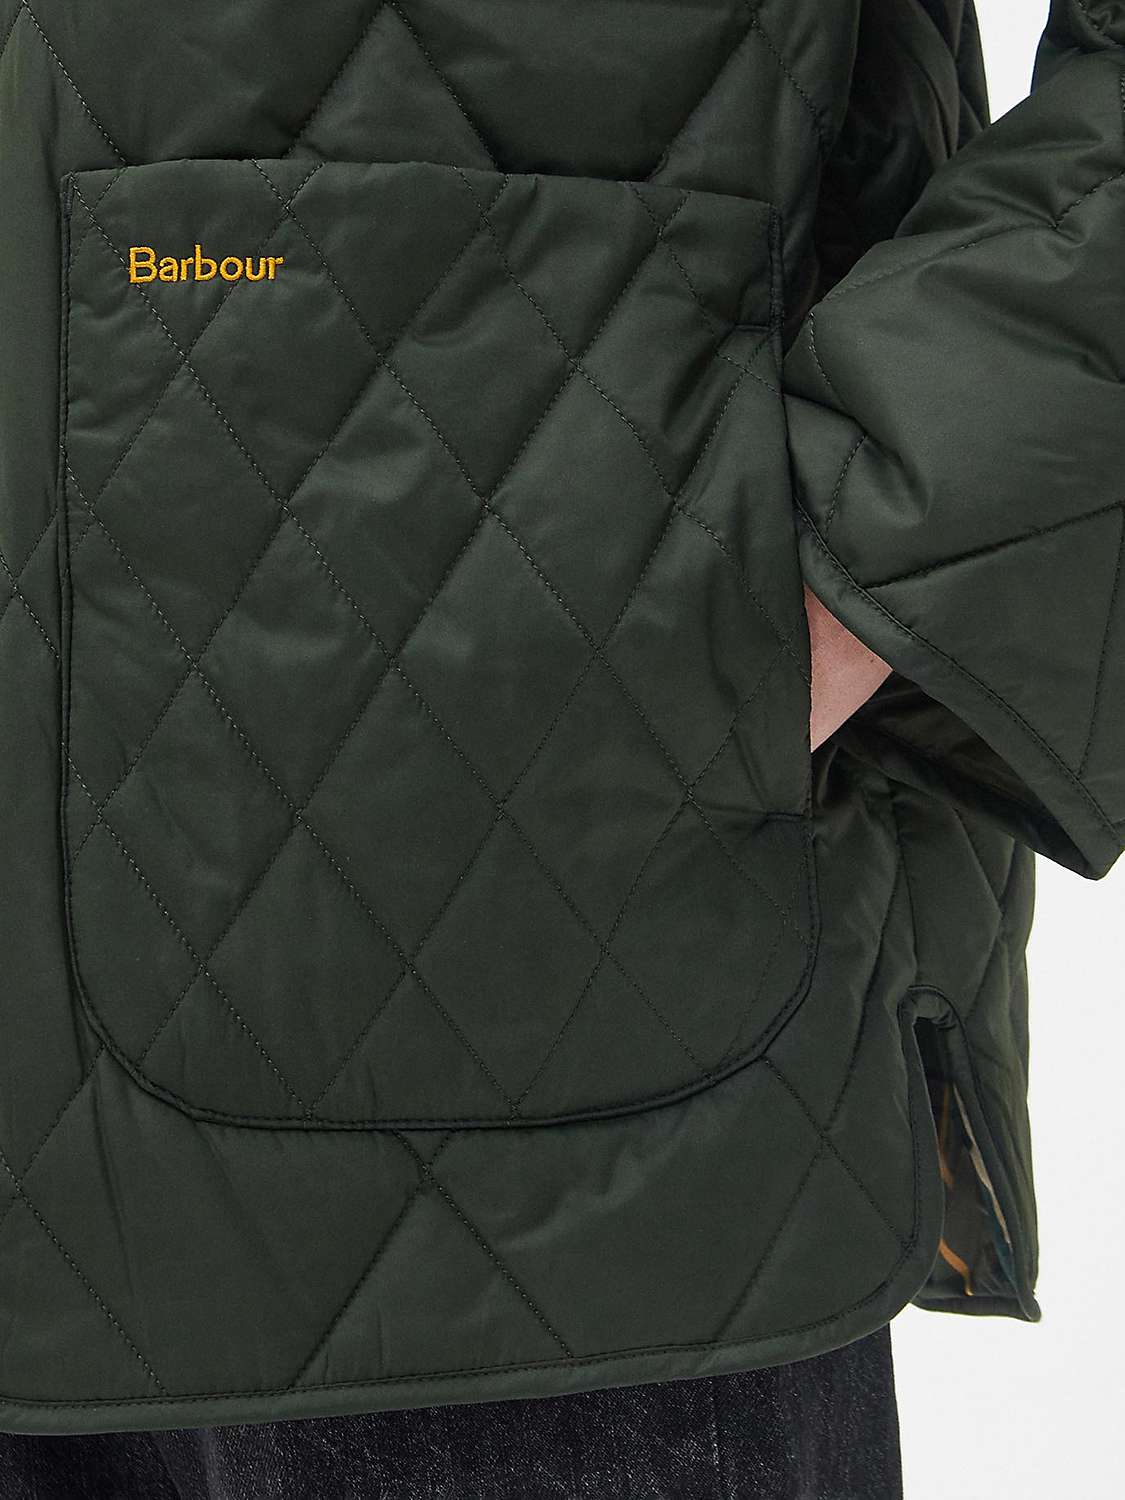 Barbour Woodhall Quilted Jacket, Sage at John Lewis & Partners